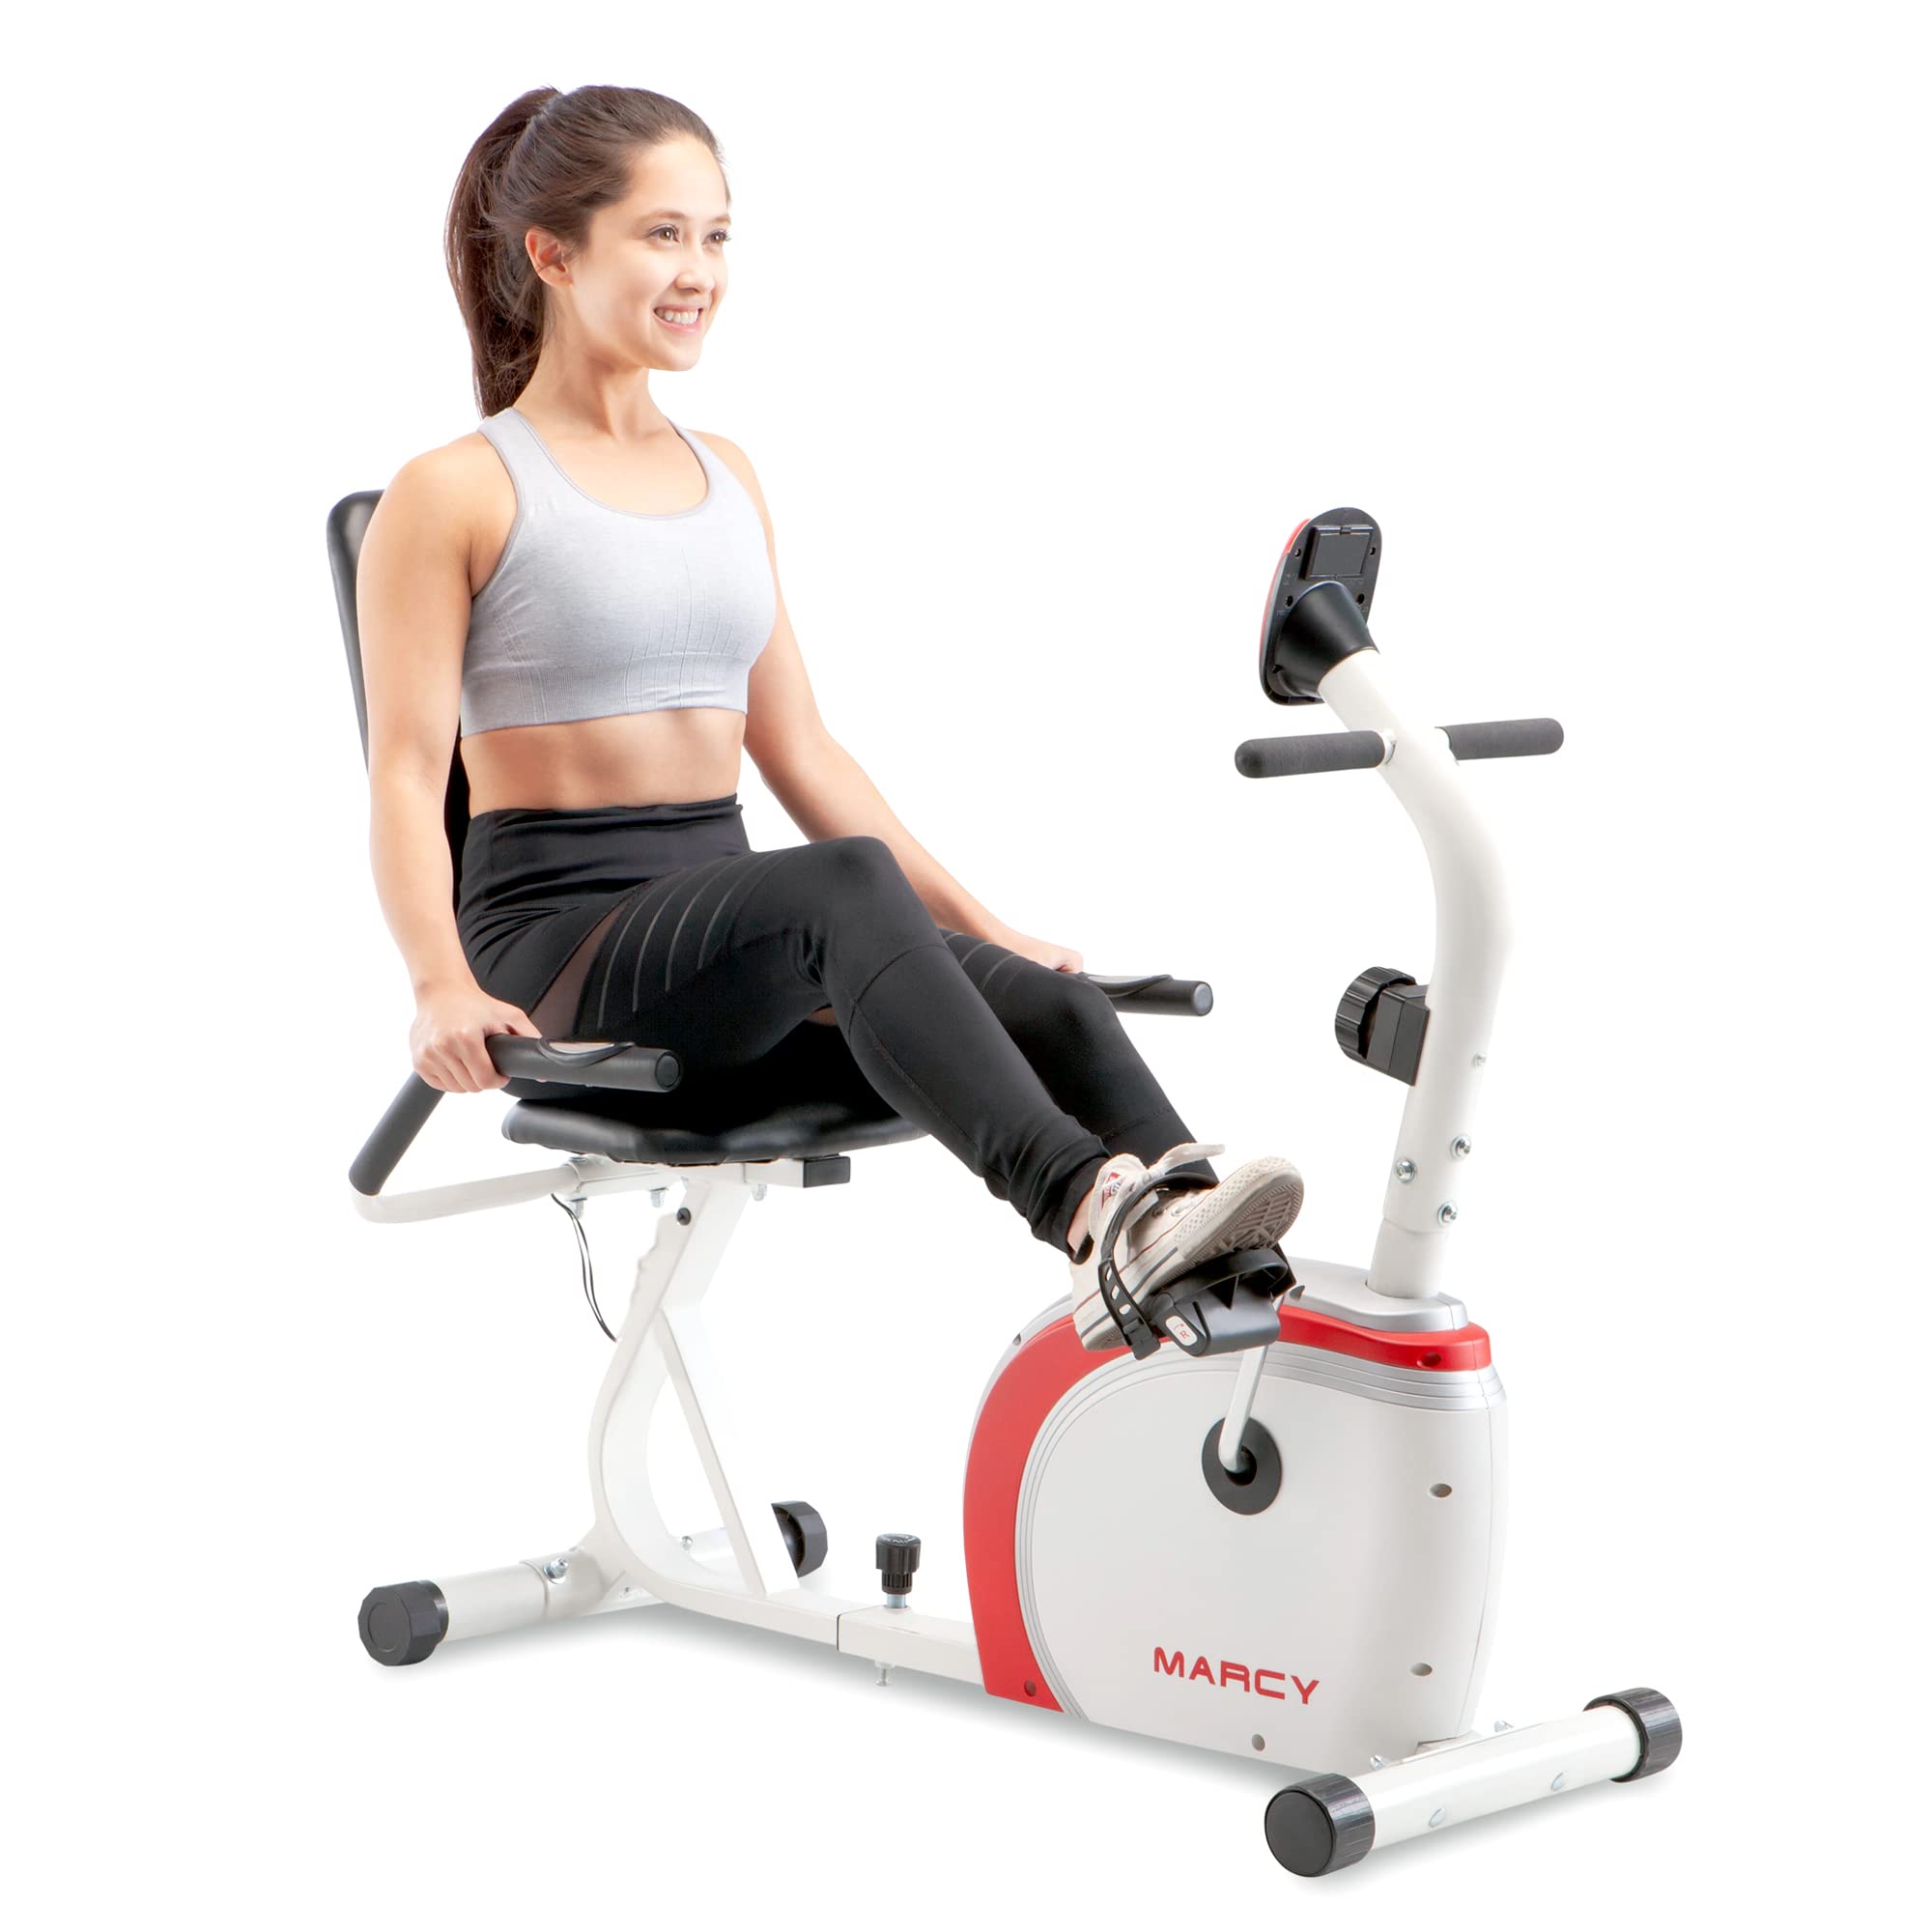 Marcy Recumbent Exercise Bike with Magnetic Resistance and Pulse Sensor NS-908R White 30.50 x 11.50 x 21.50 inches